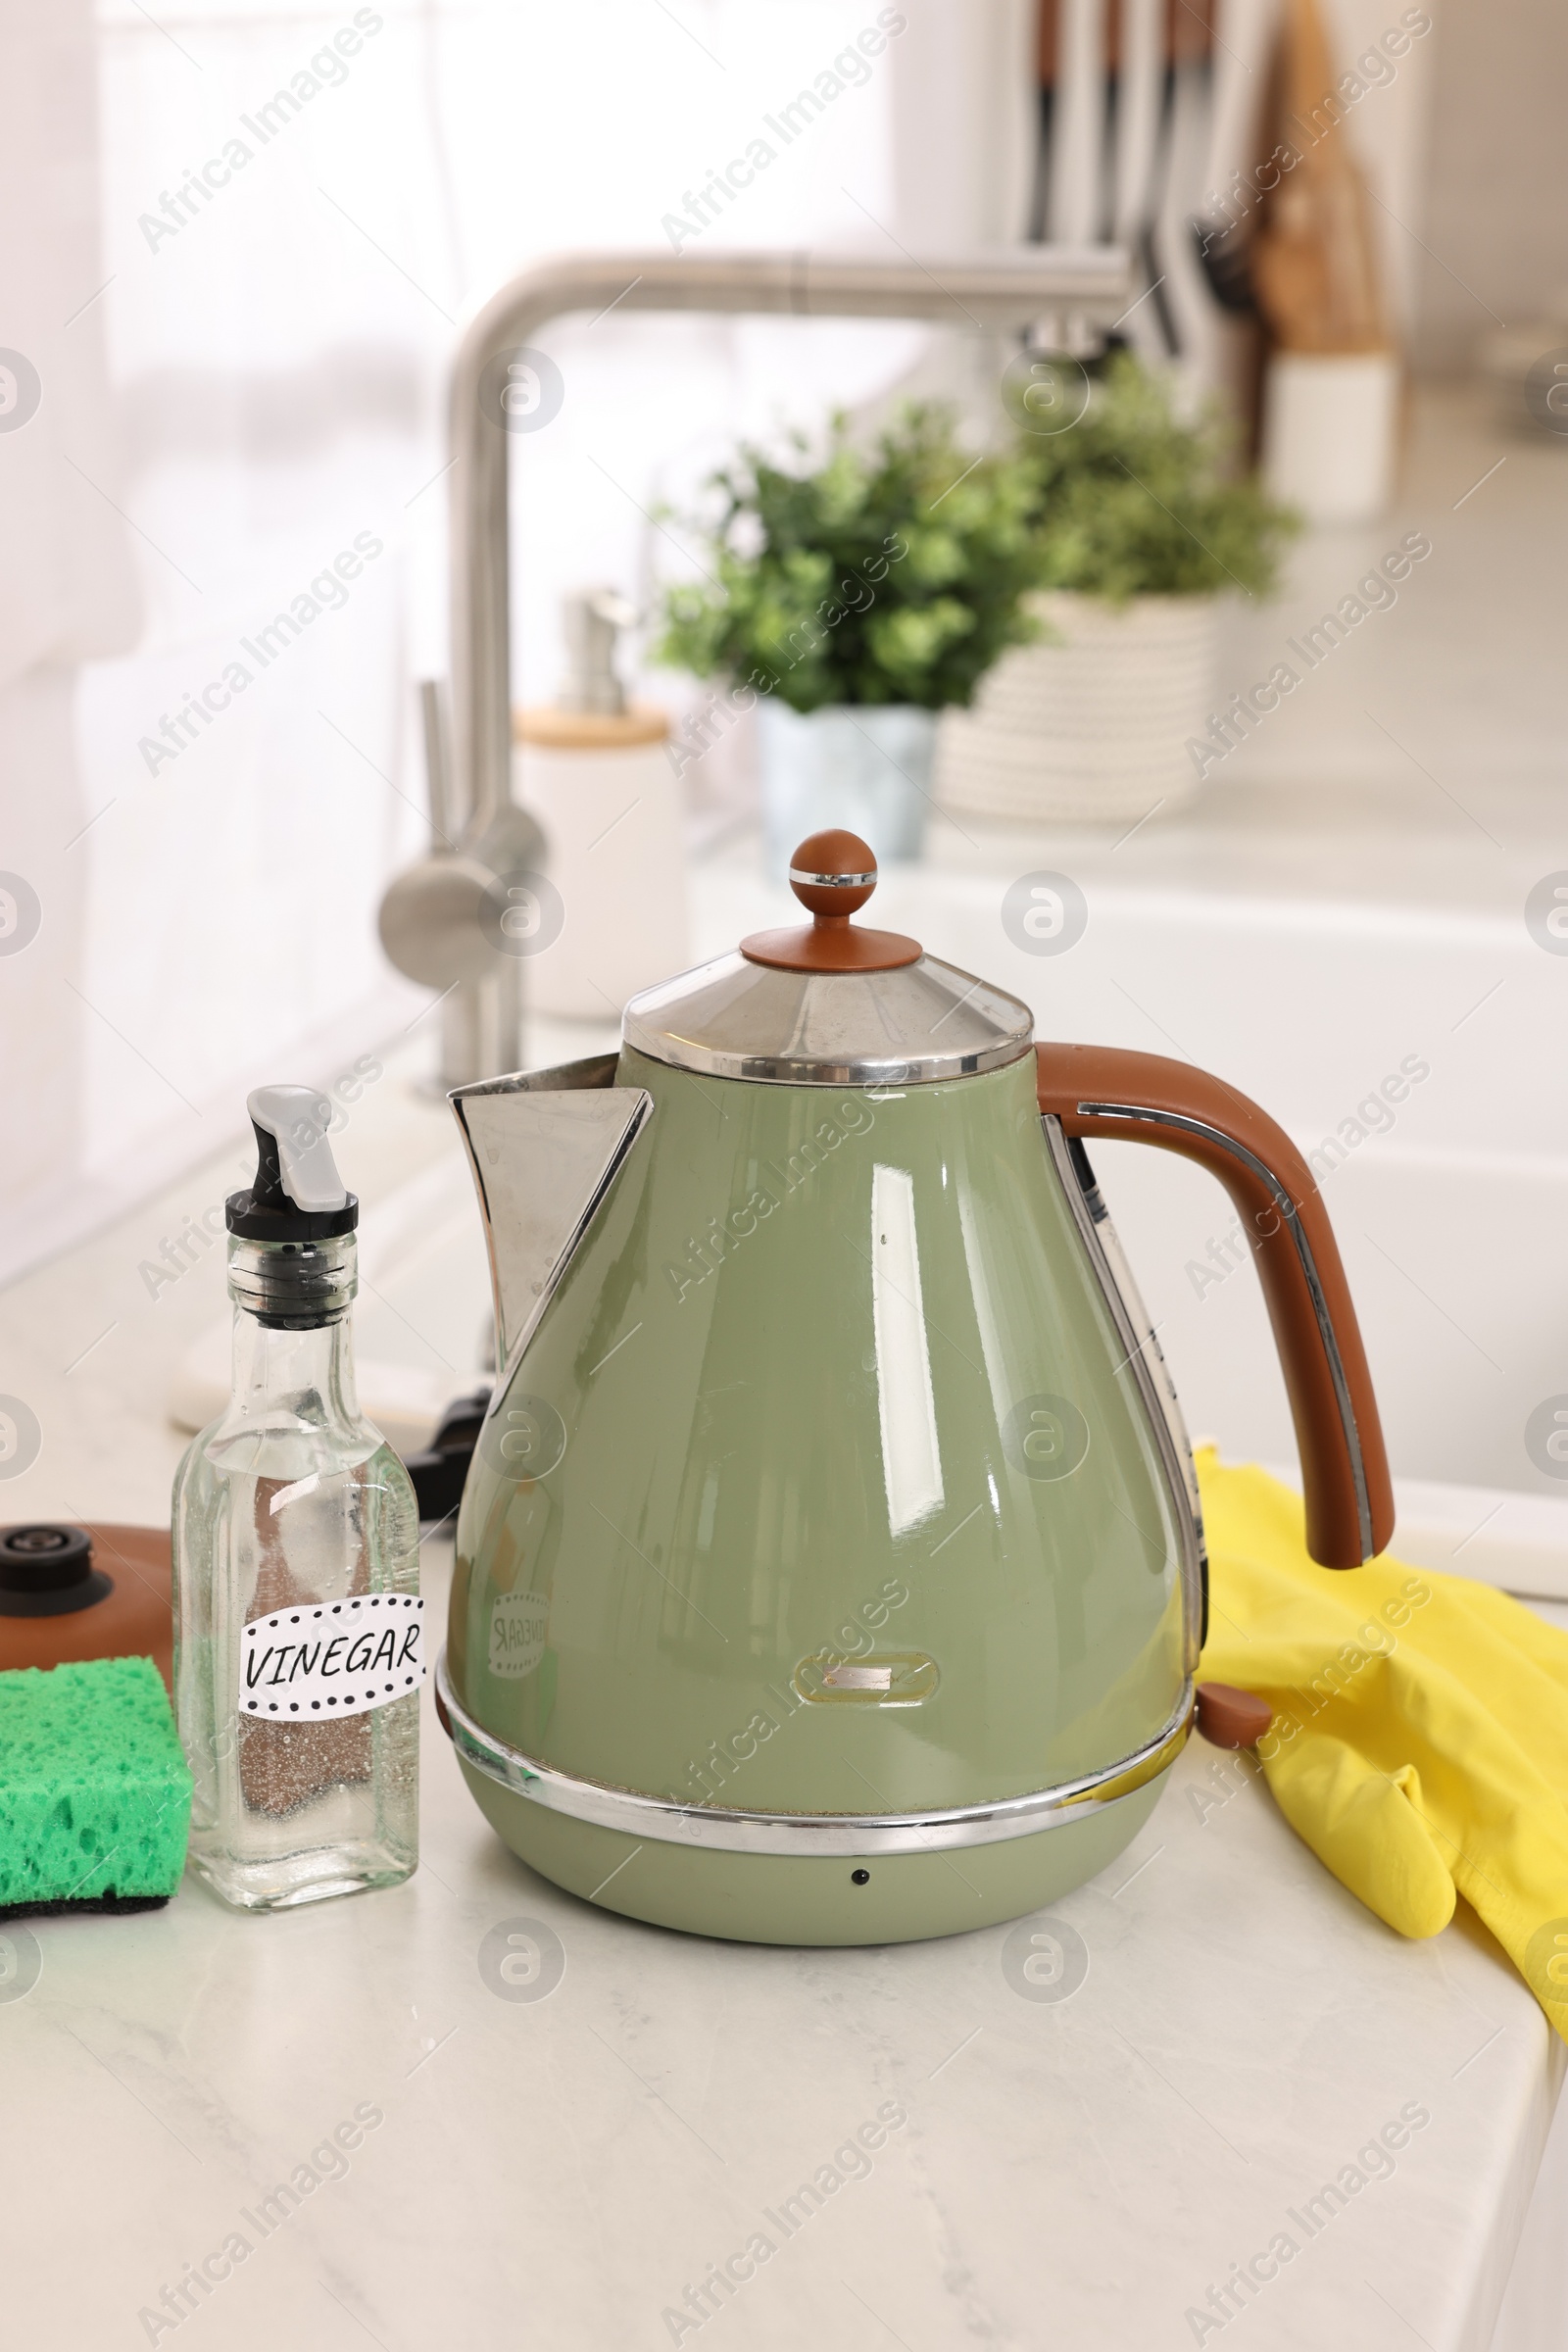 Photo of Cleaning electric kettle. Bottle of vinegar, sponge and rubber glove on countertop in kitchen